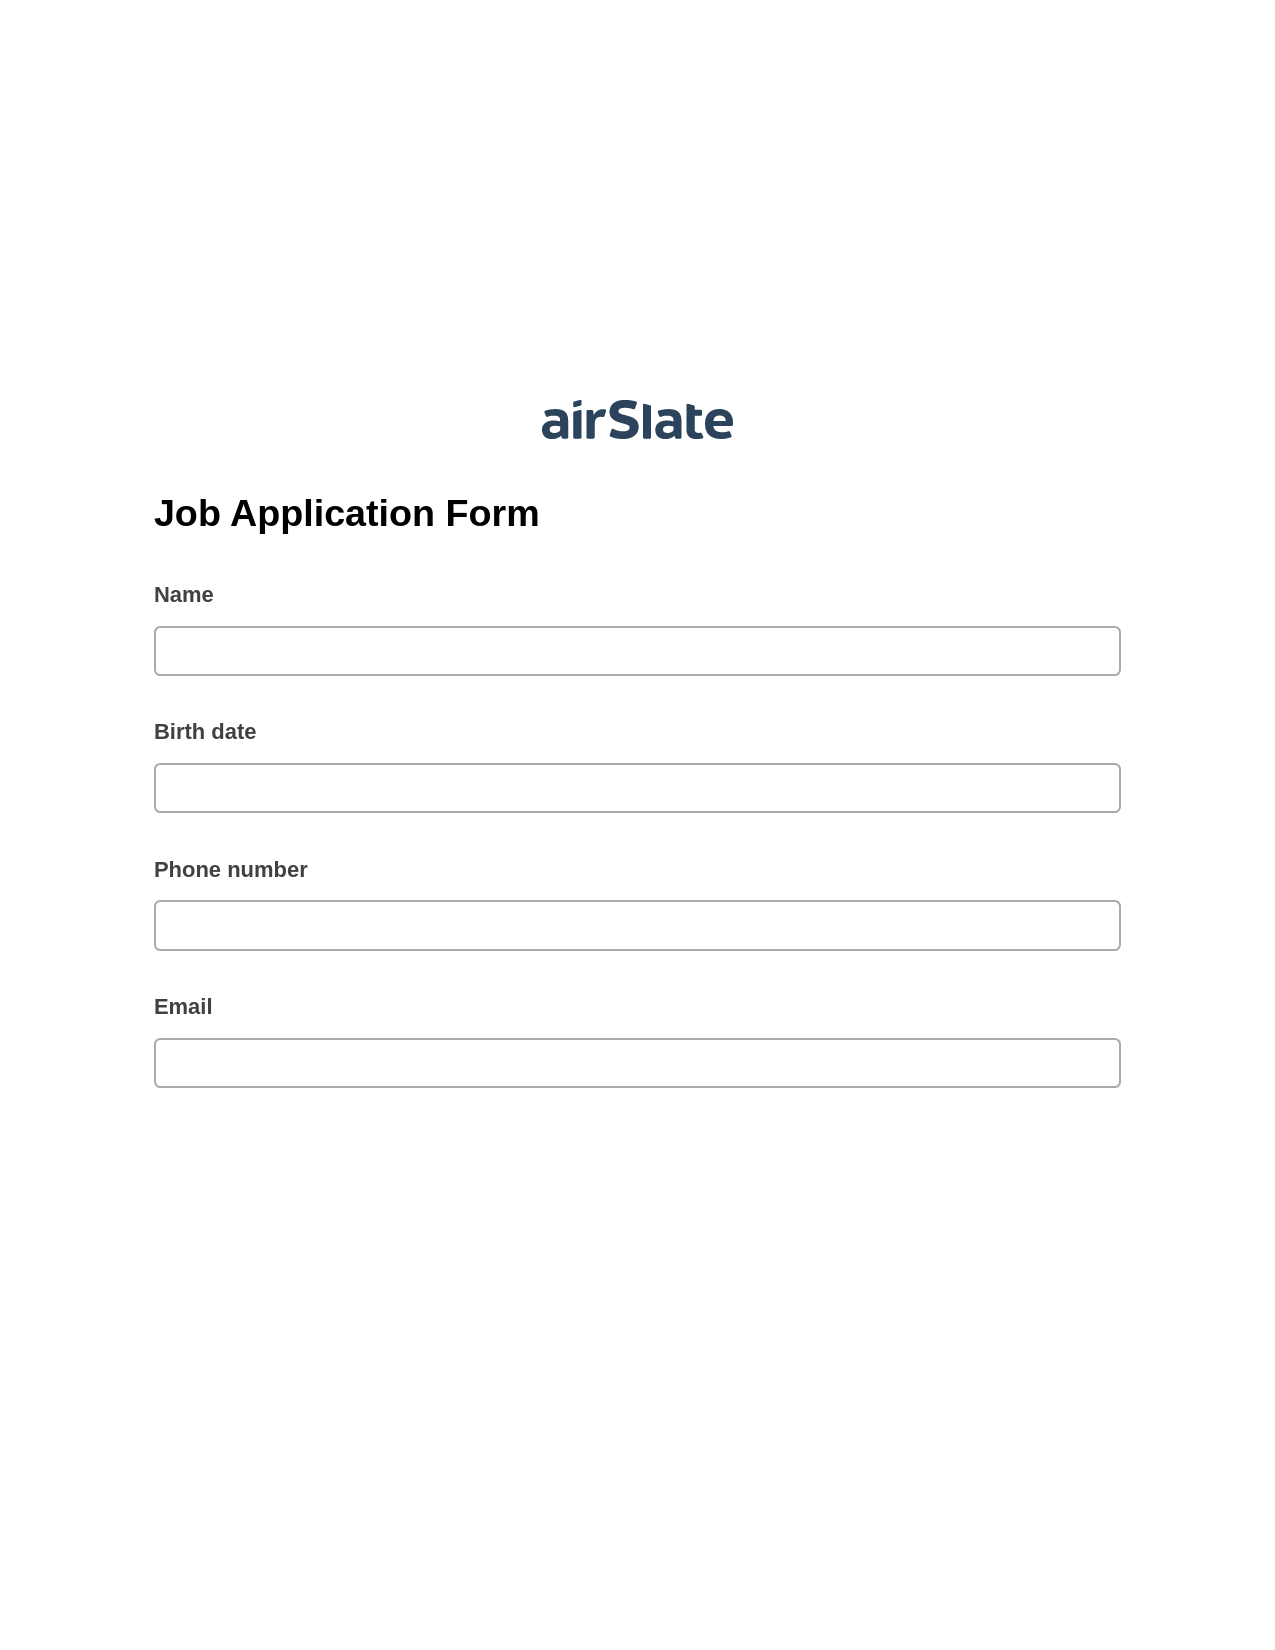 Job Application Form Pre-fill from CSV File Dropdown Options Bot, Create Slate from another Flow Bot, Export to Salesforce Bot